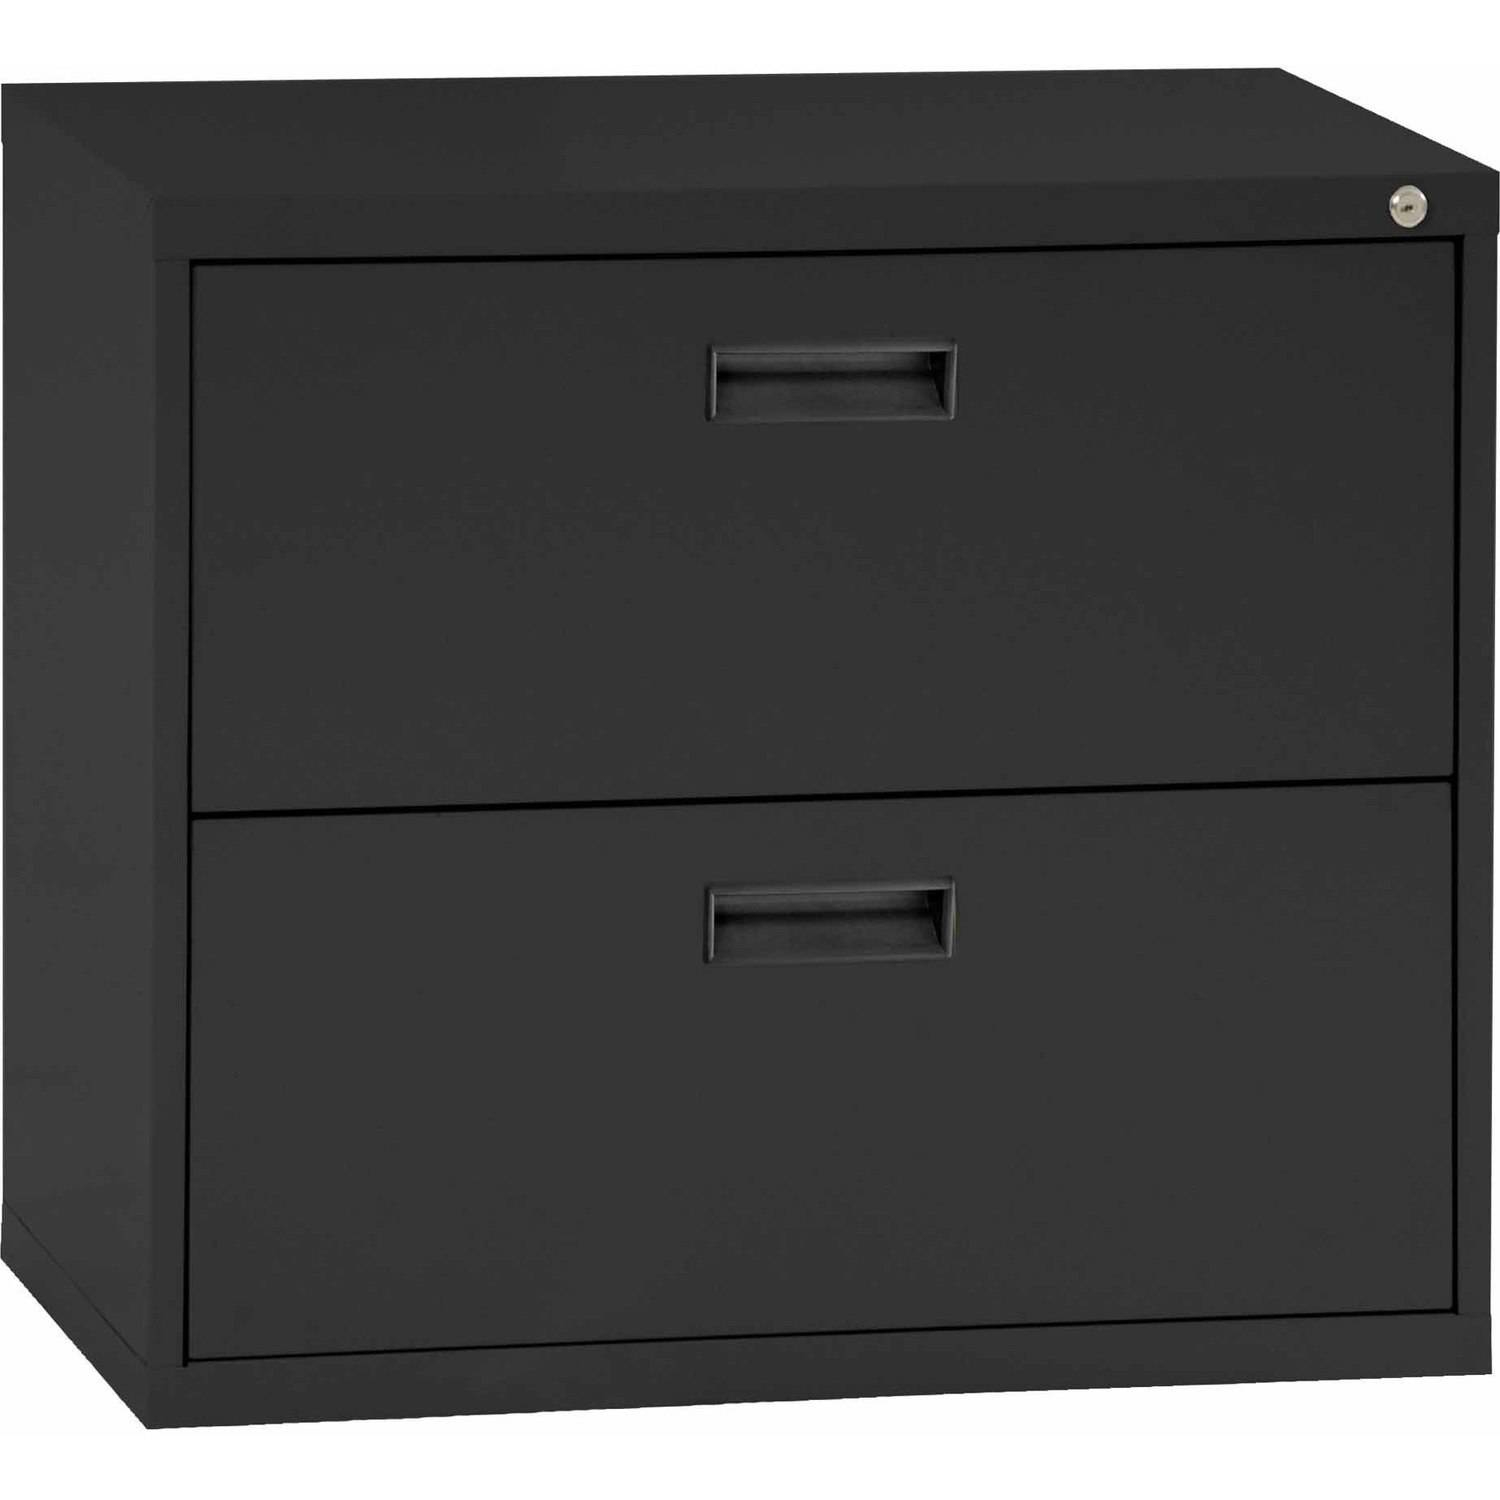 Sandusky Steel Lateral File Cabinet With Plastic Handle 2 Drawers inside proportions 1500 X 1500